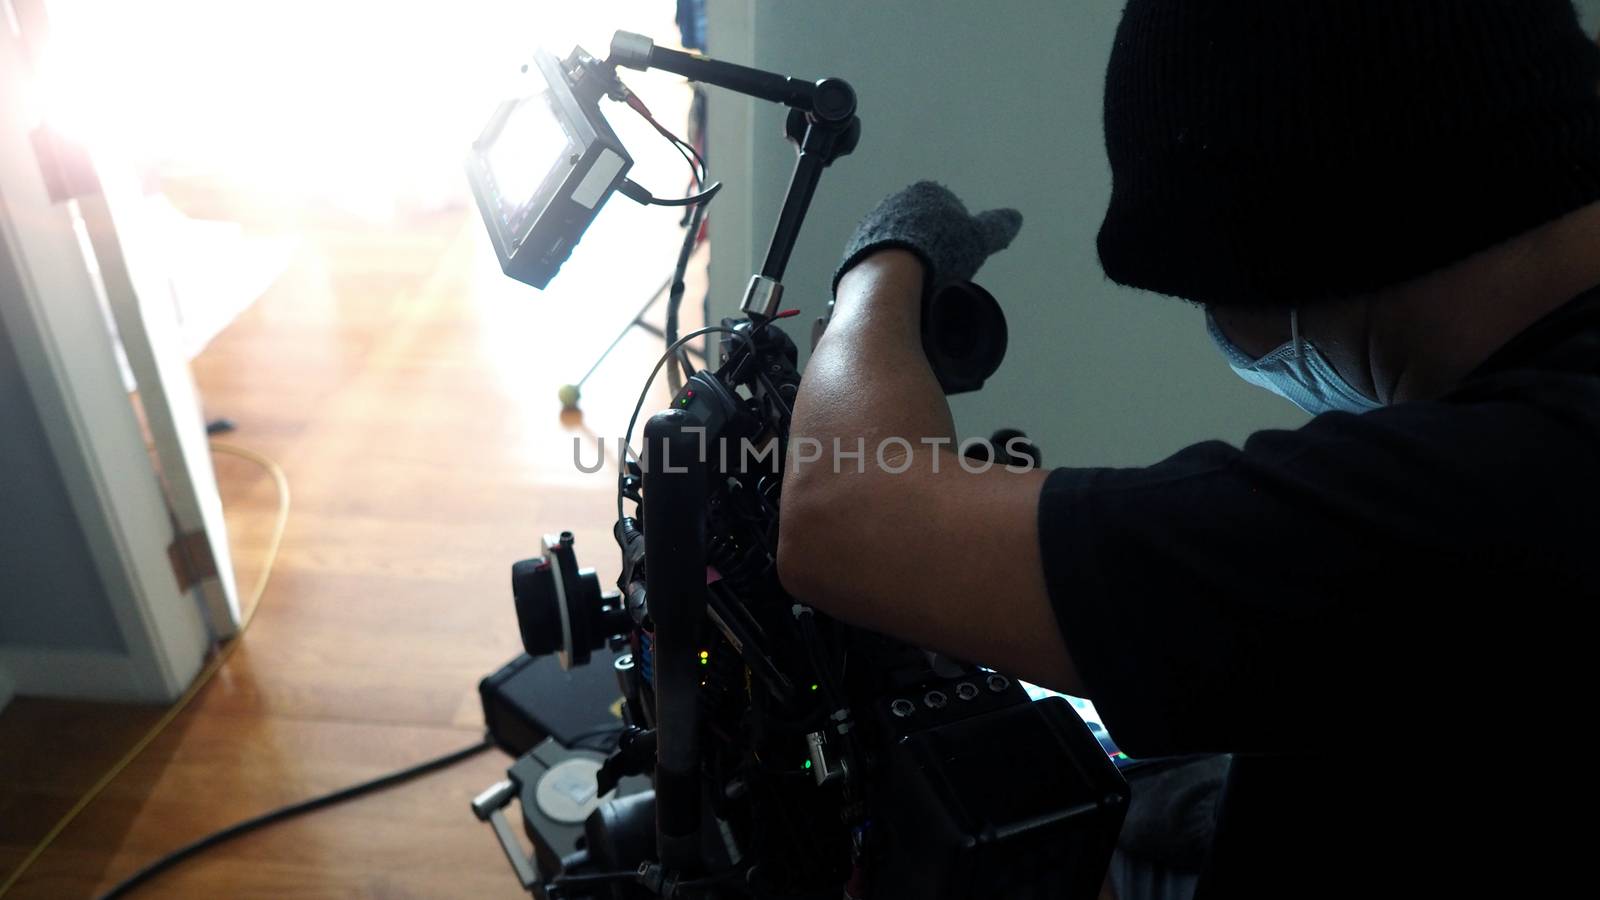 Behind the scenes of photographer shooting video or movie production with camera set on tripod at location.